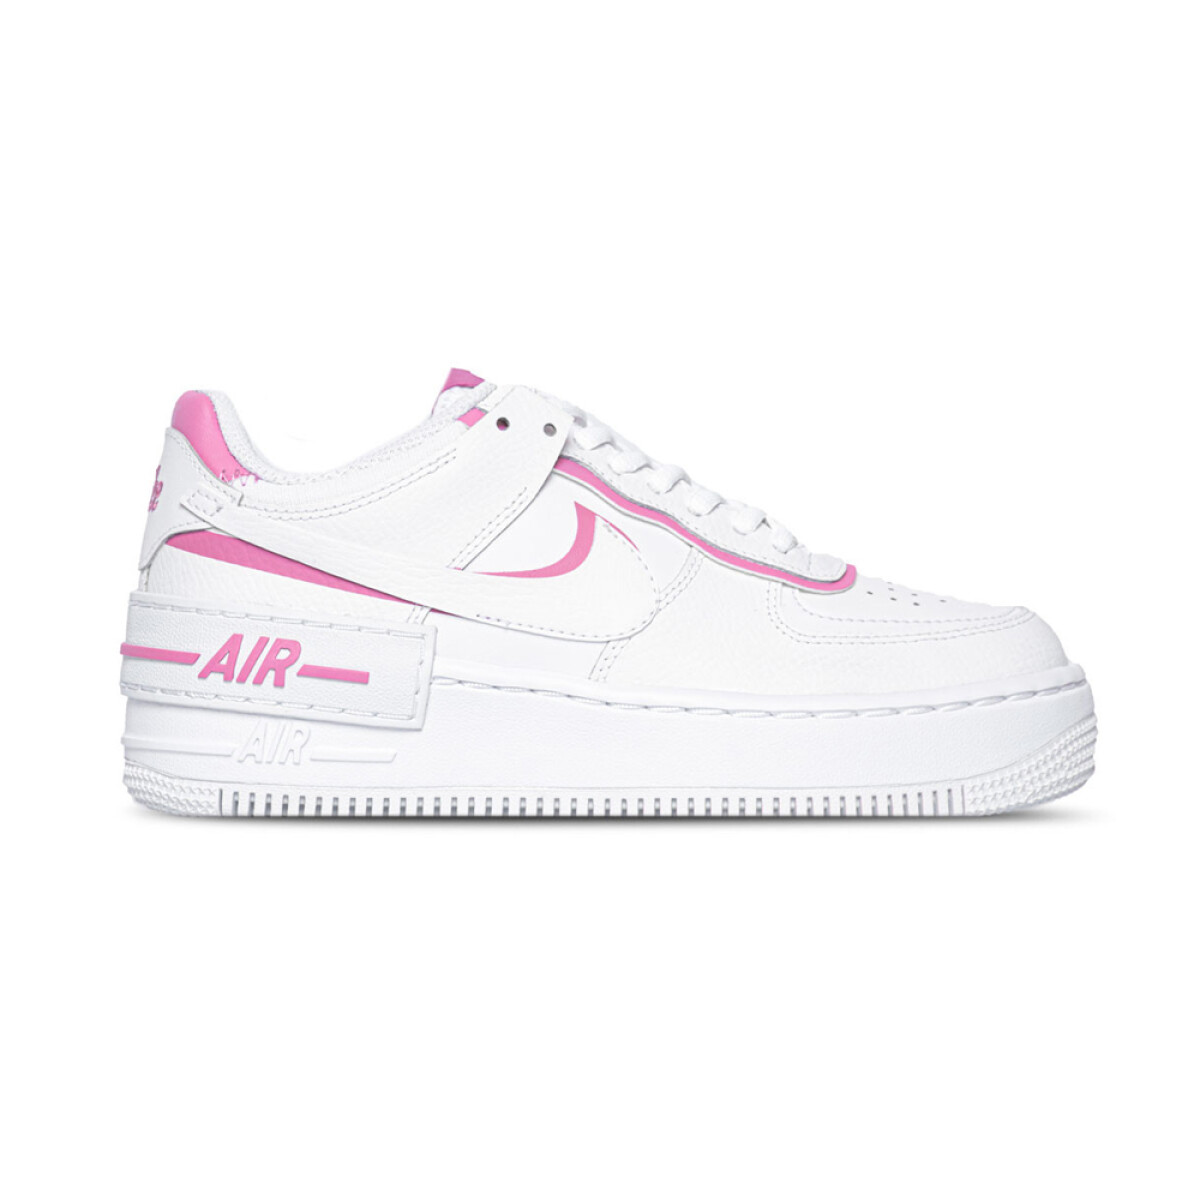 NIKE AIR FORCE 1 SHADOW - White/Pink 